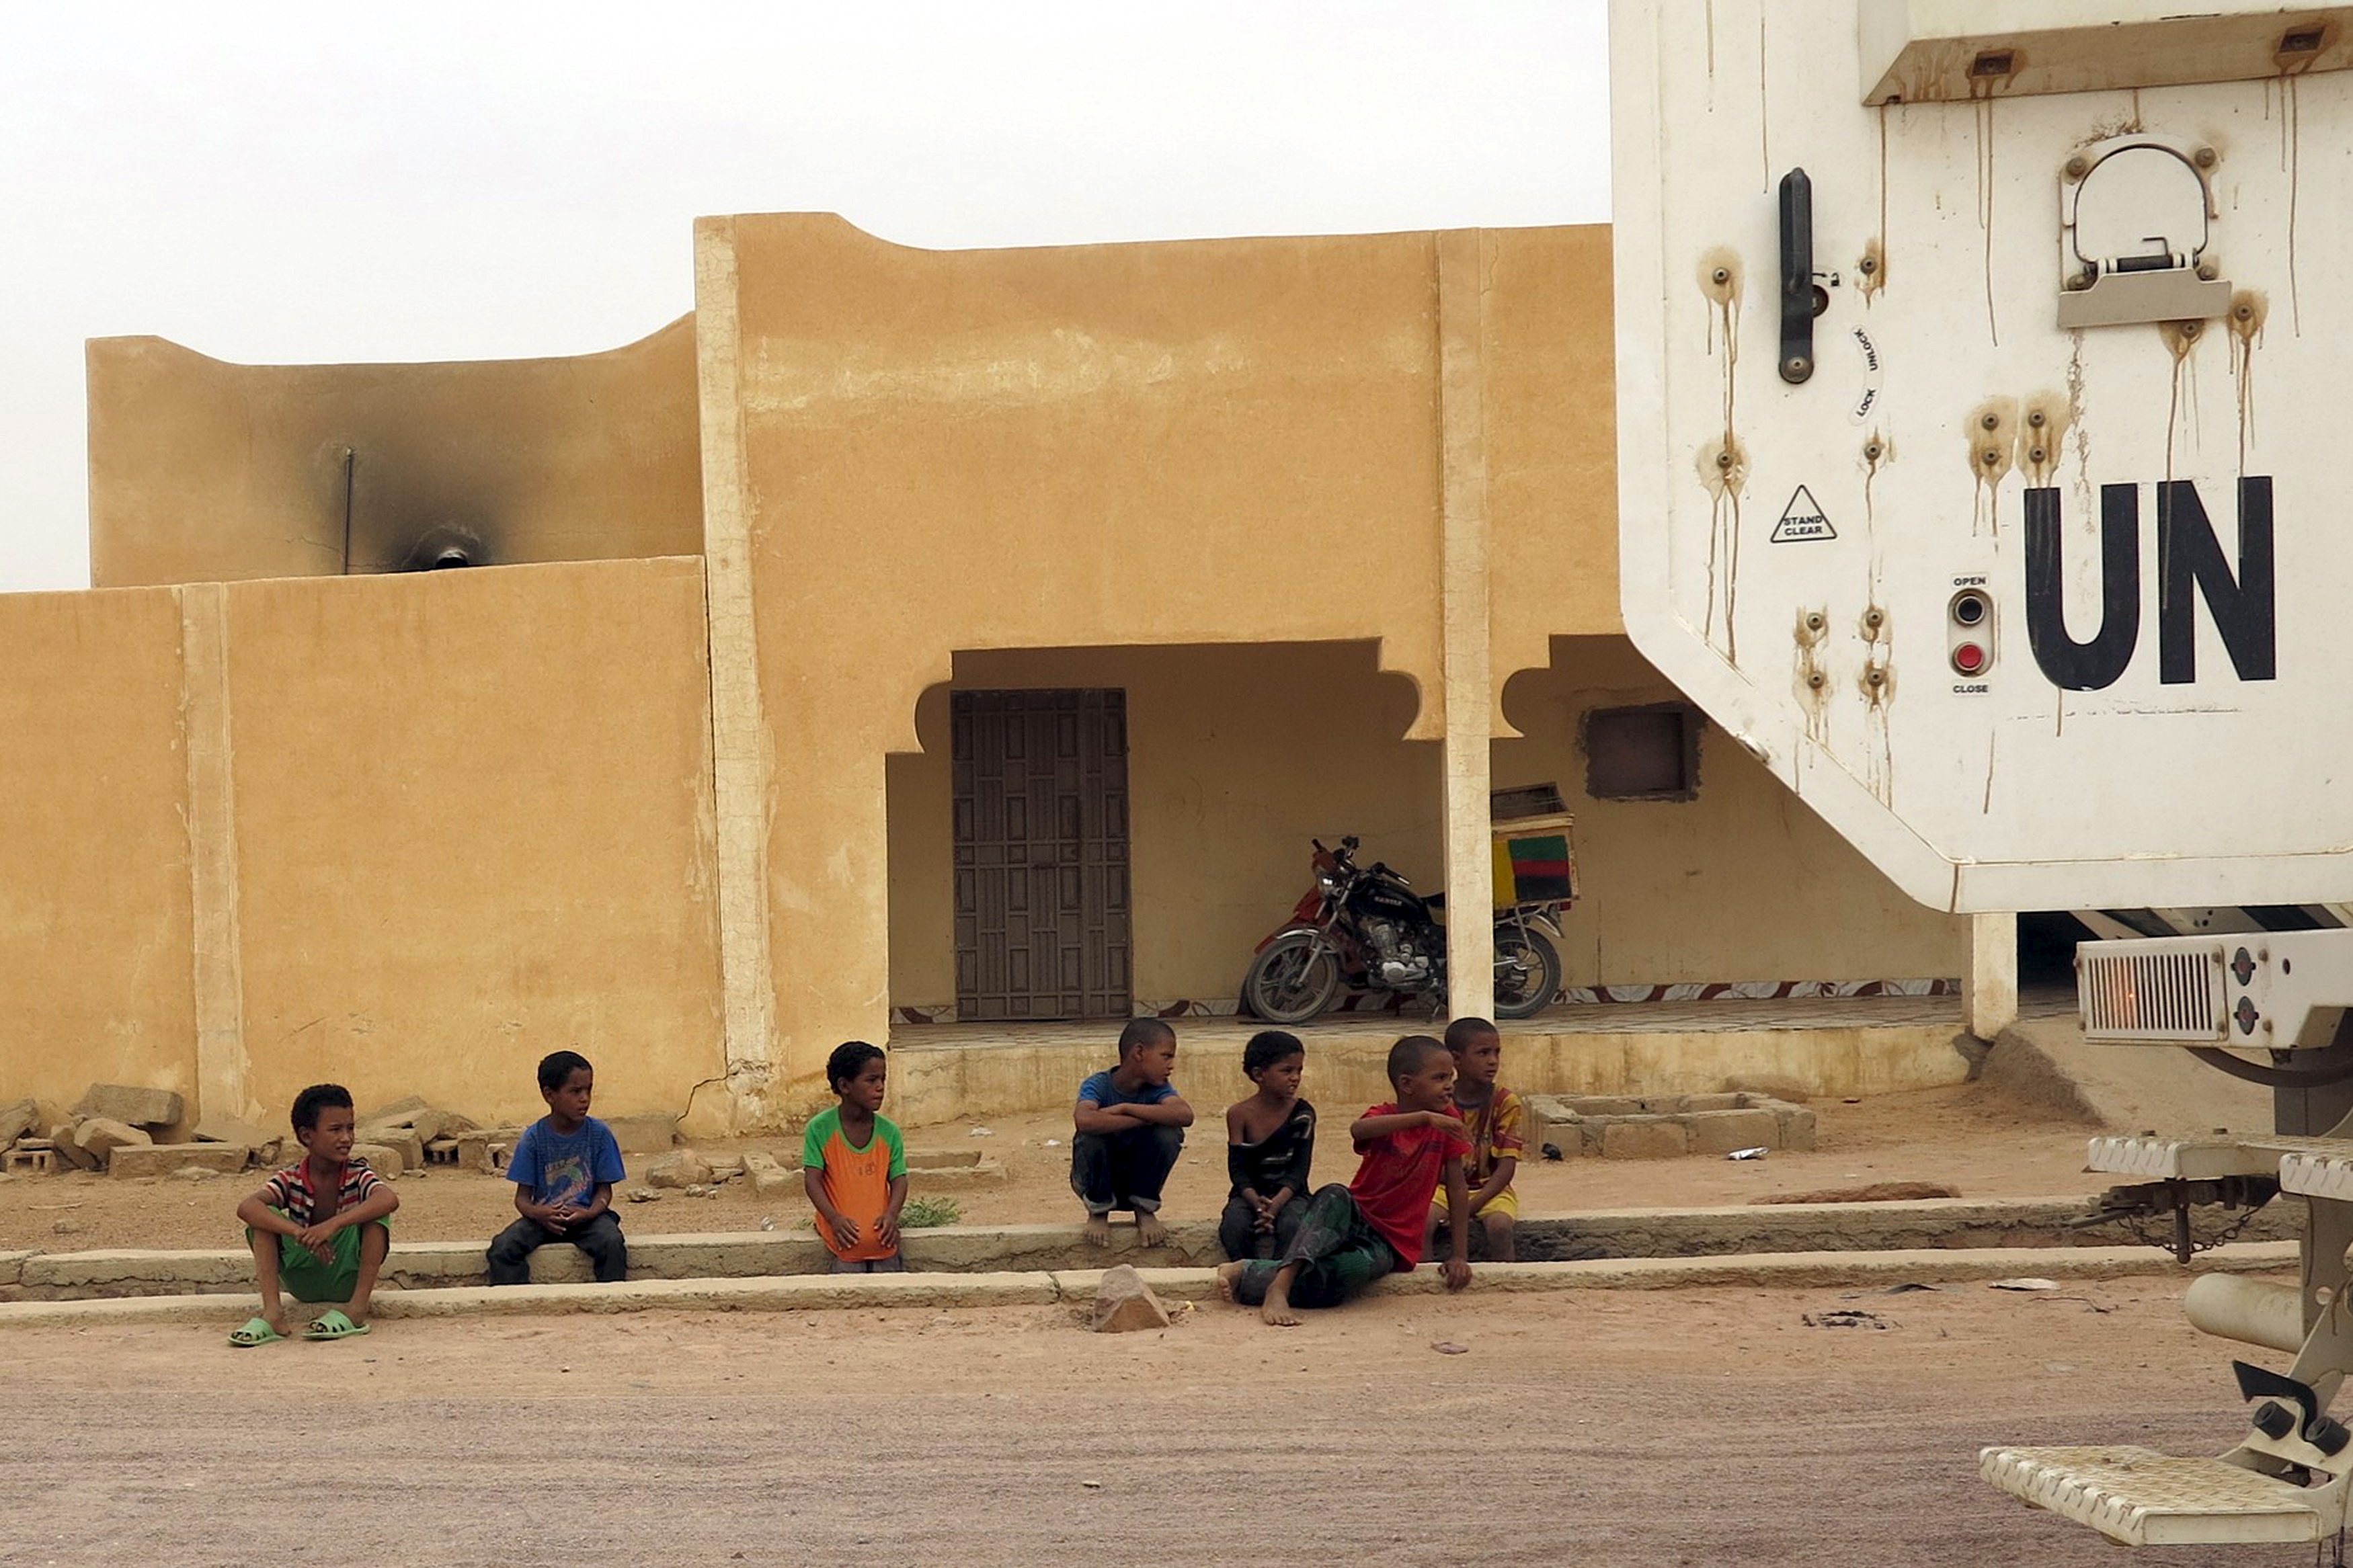 Children watch as a Minusma peacekeeping armored vehicle drive past in Kidal